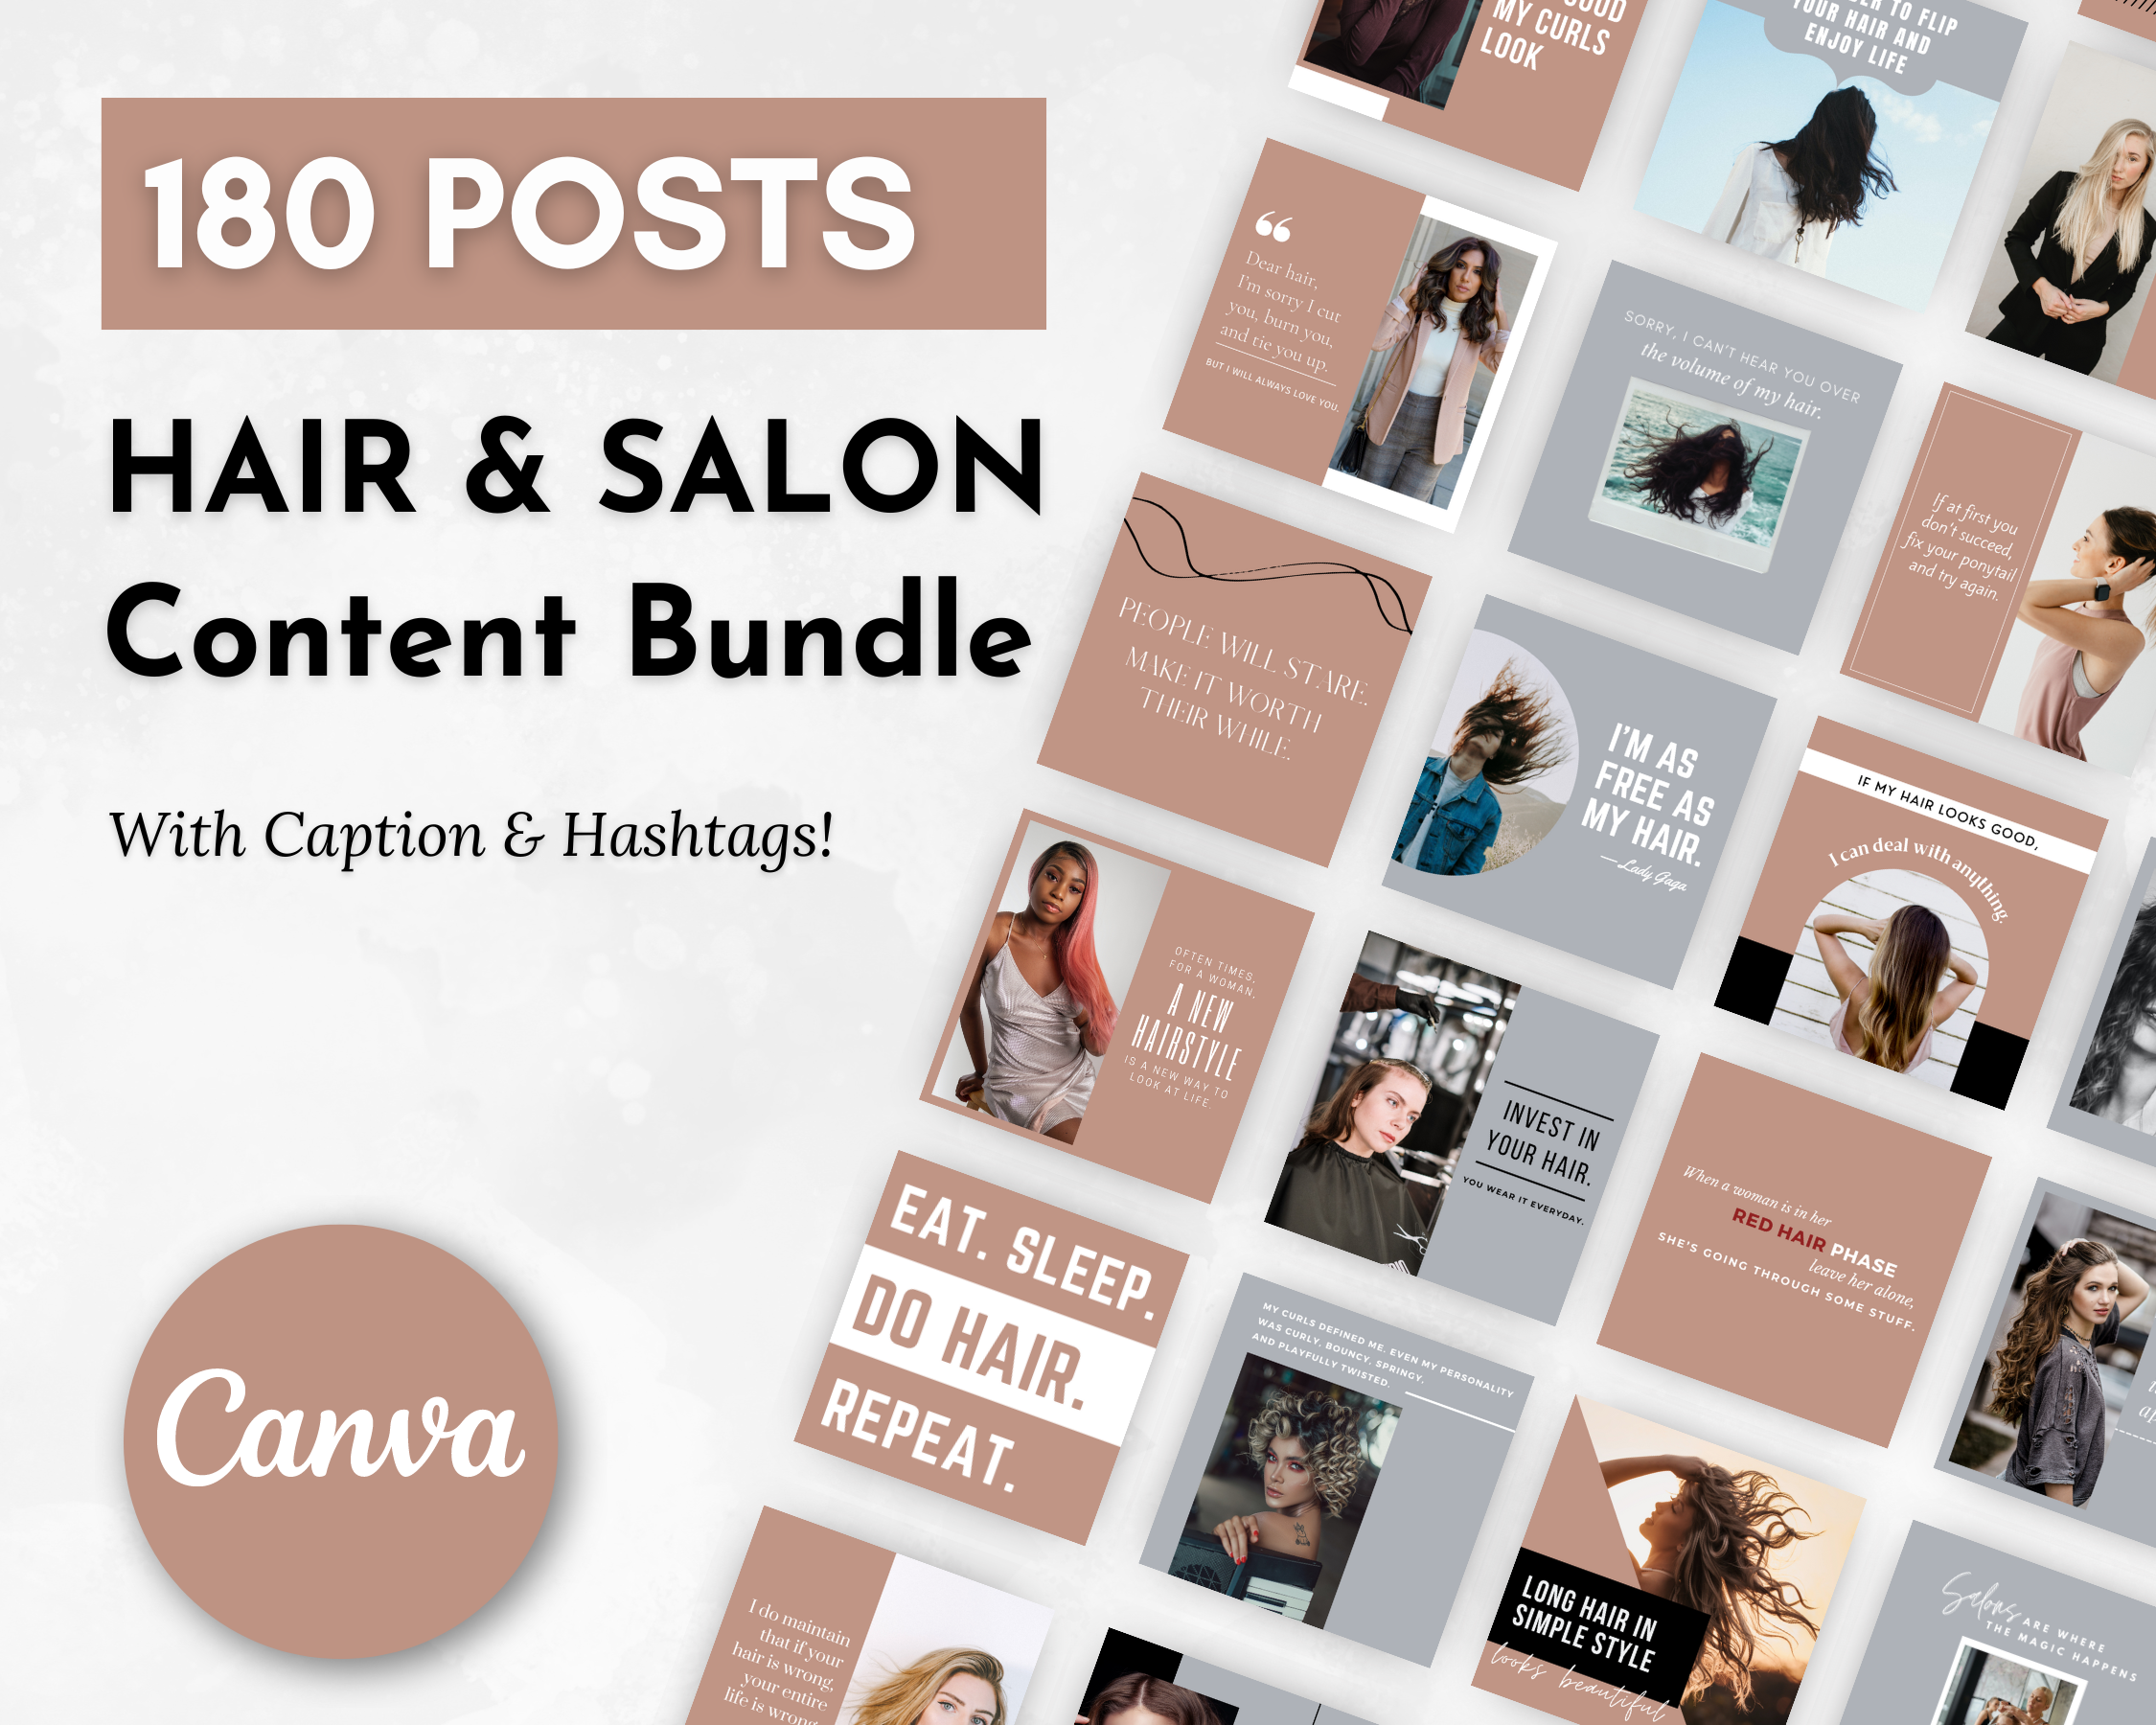 Hair & Salon Social Media Post Bundle with Canva Templates by Socially Inclined for social media platforms.